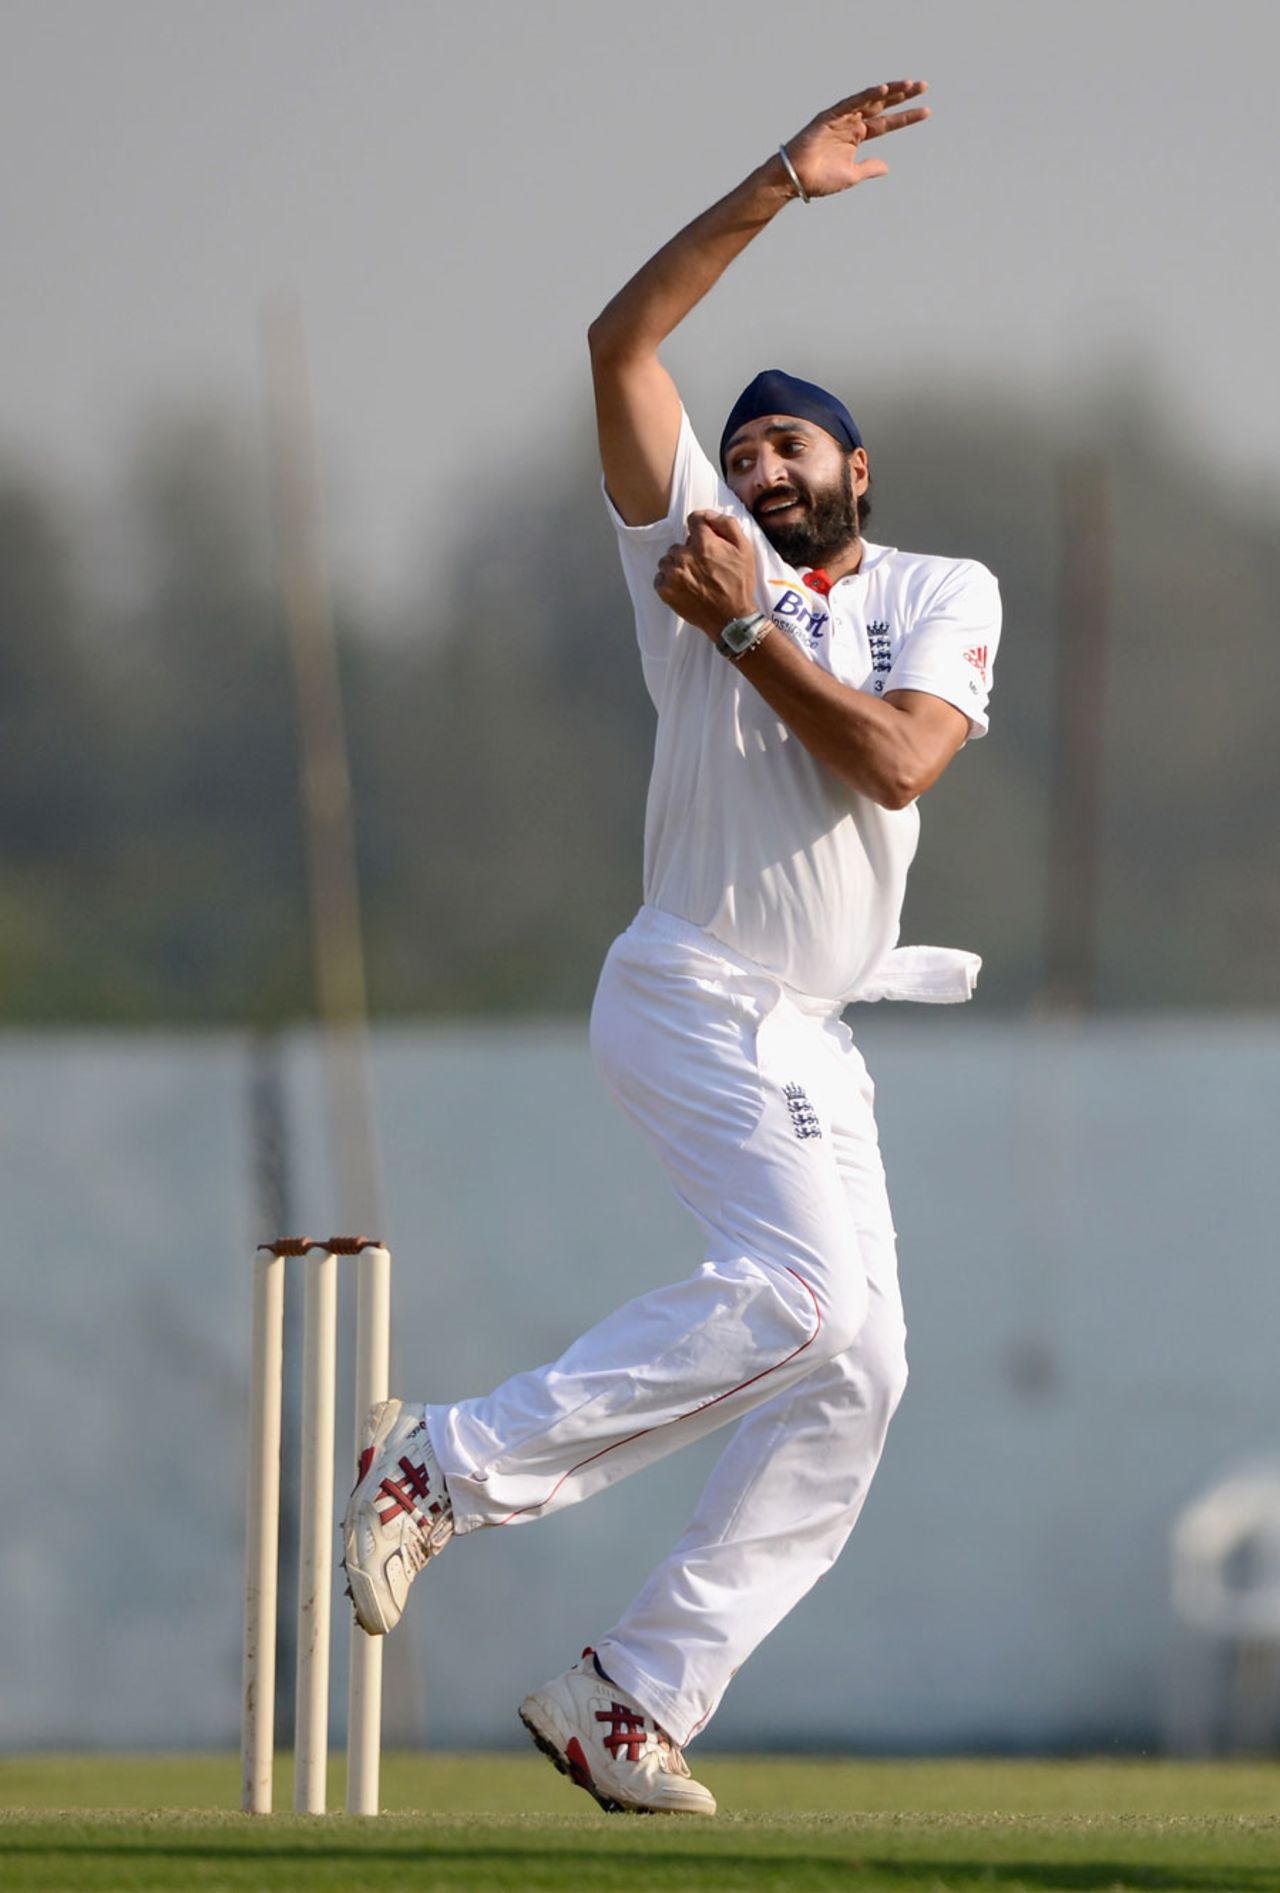 Monty Panesar bowled economically and took a wicket, Haryana v England XI, tour match, Ahmedabad, 2nd day, November 9, 2012